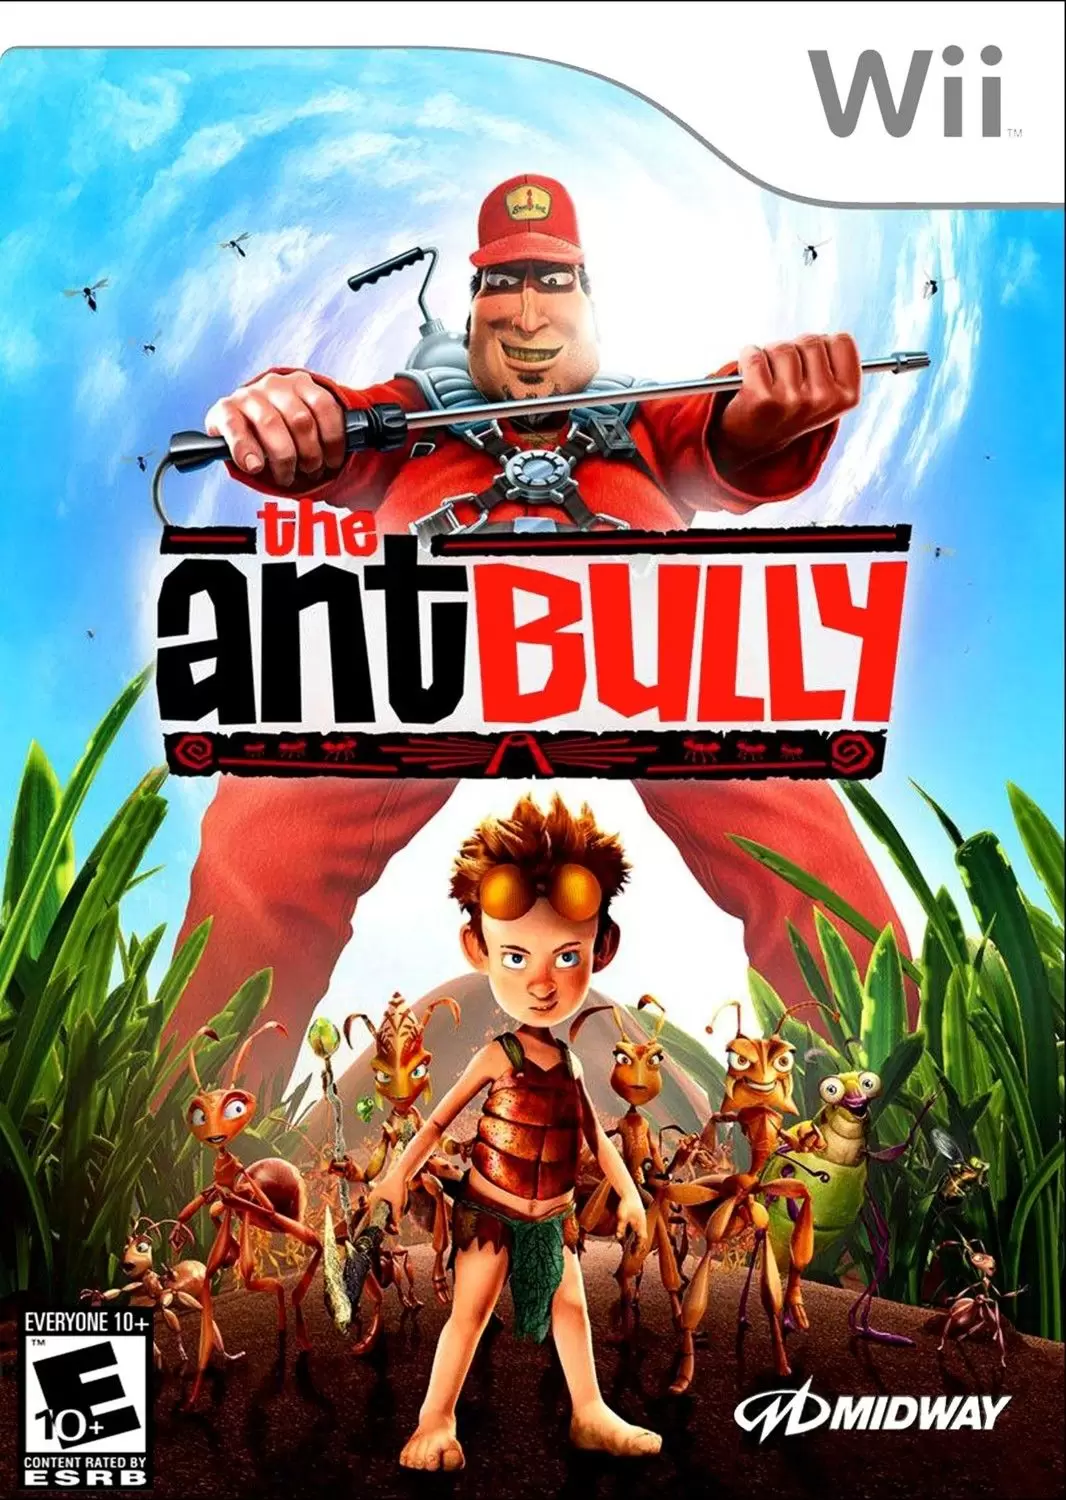 Nintendo Wii Games - The Ant Bully